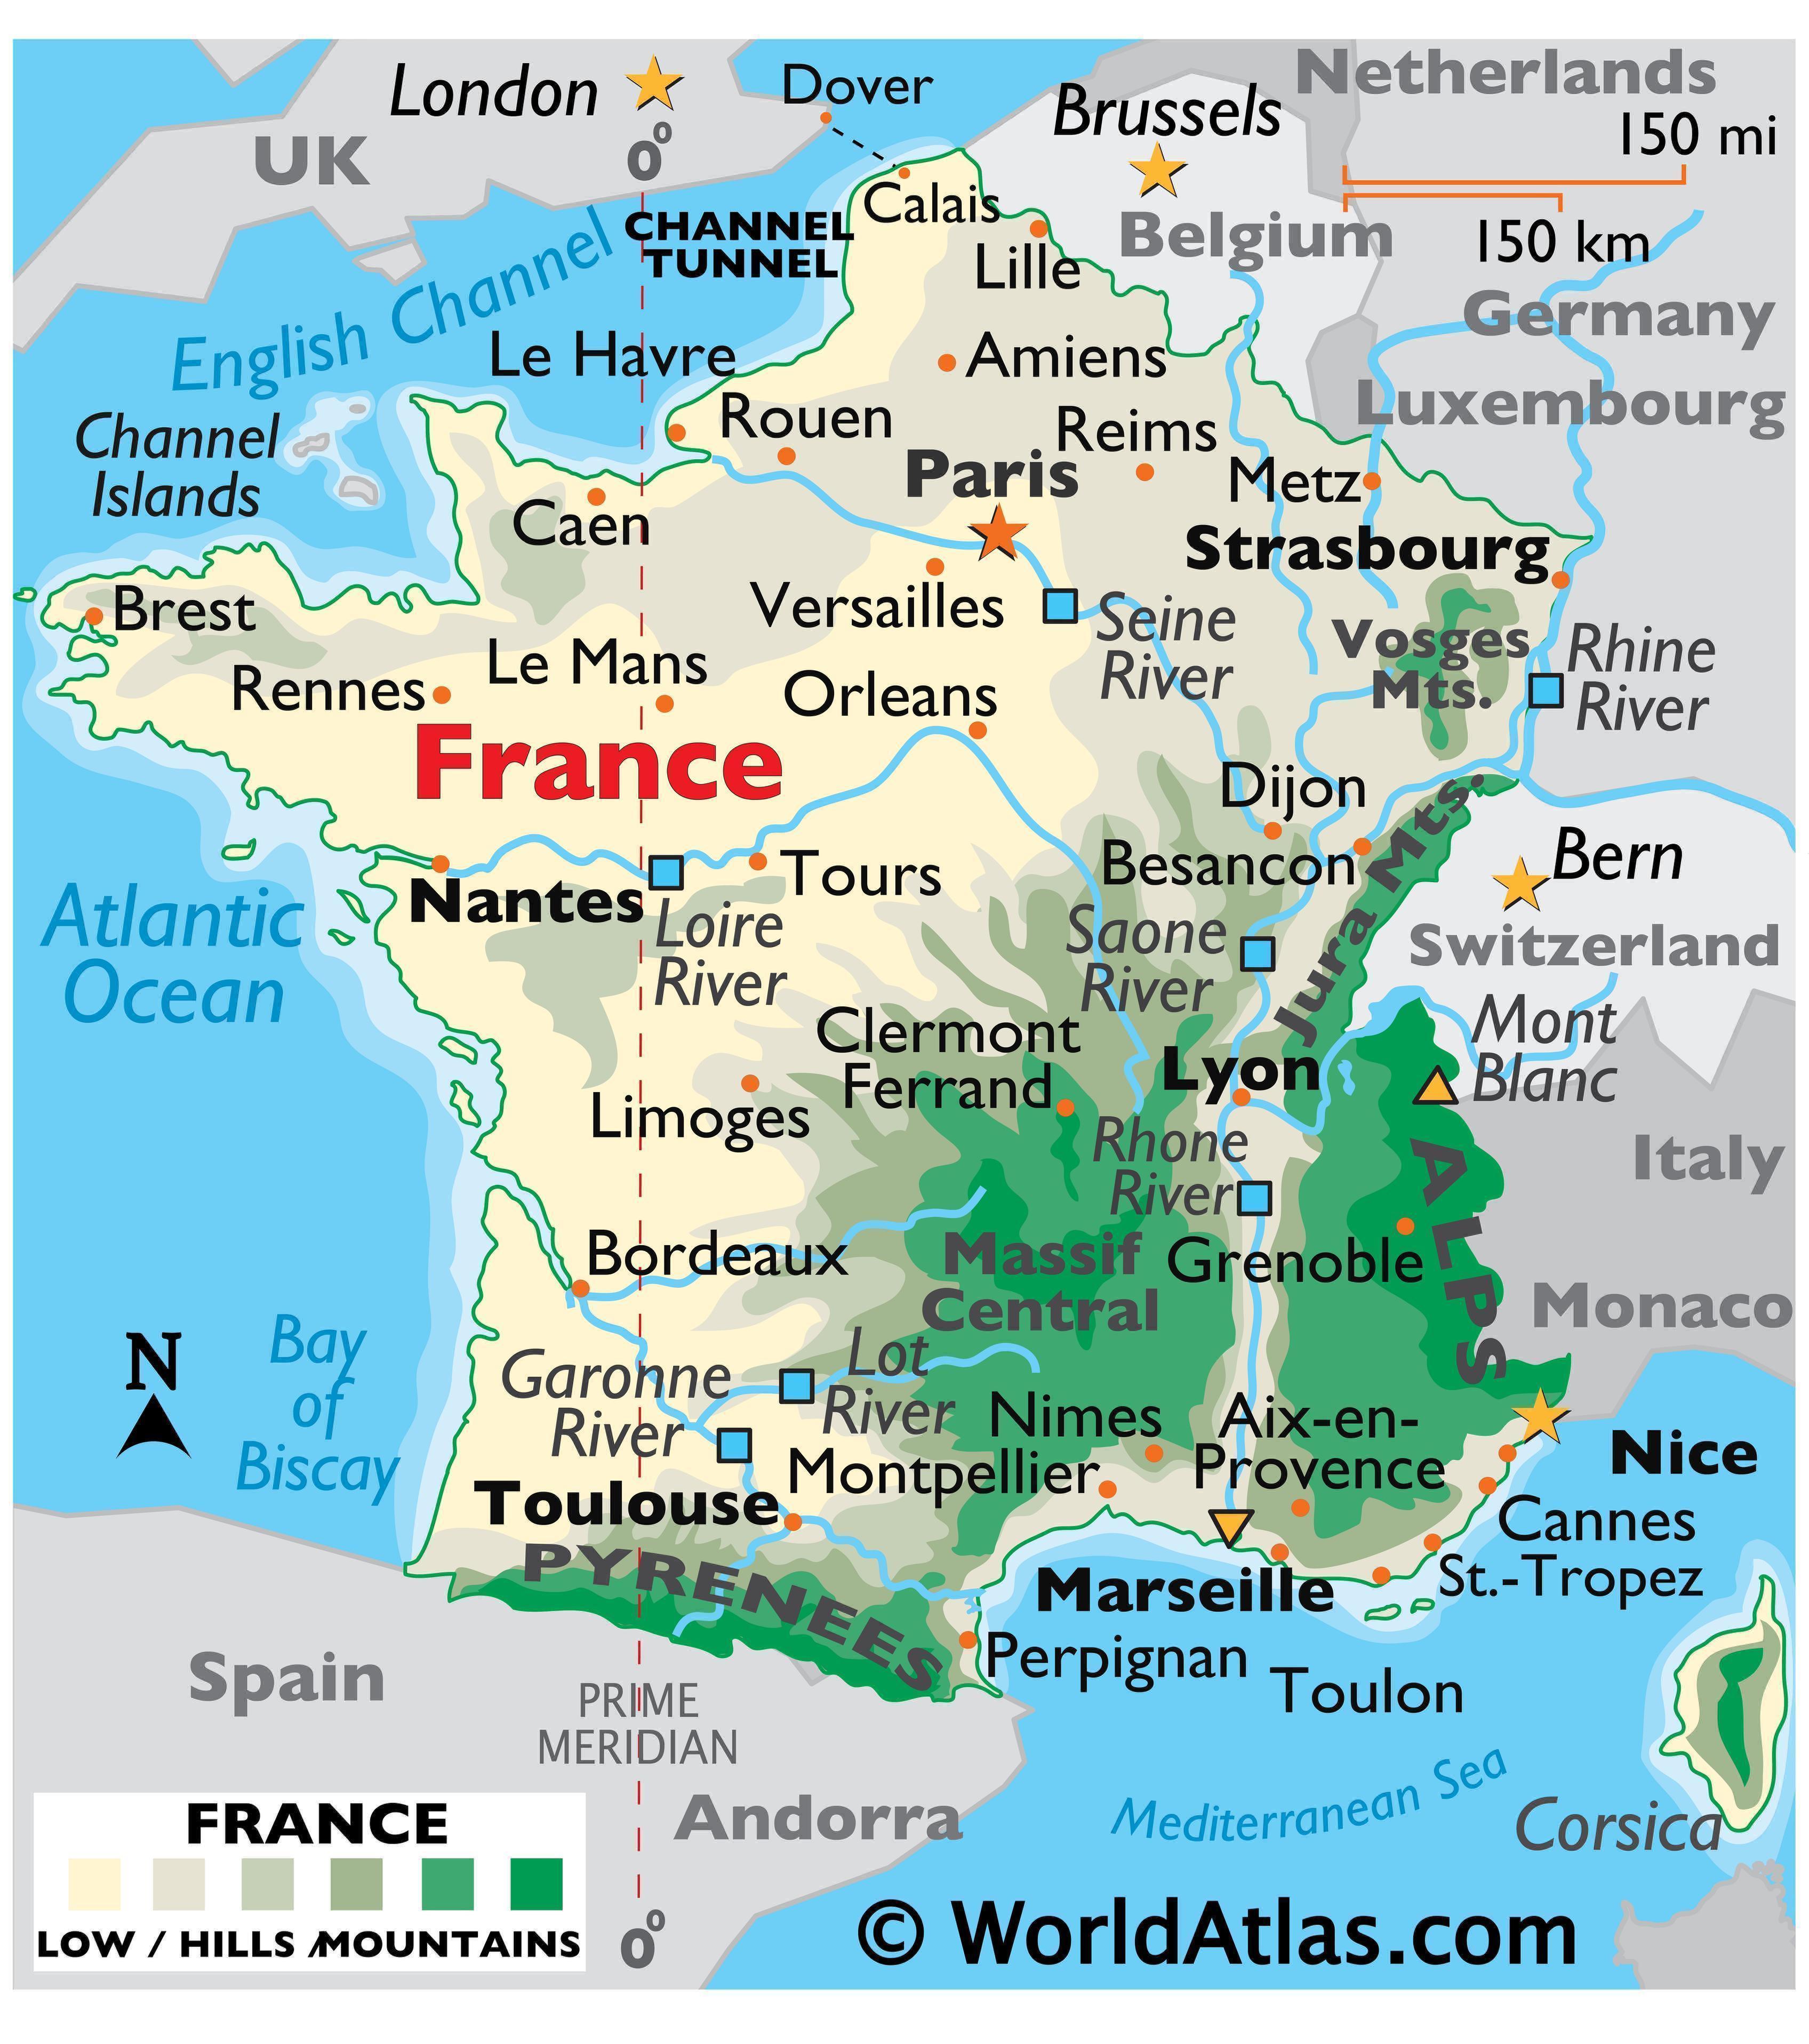 paris on physical map of france France Map Geography Of France Map Of France Worldatlas Com paris on physical map of france